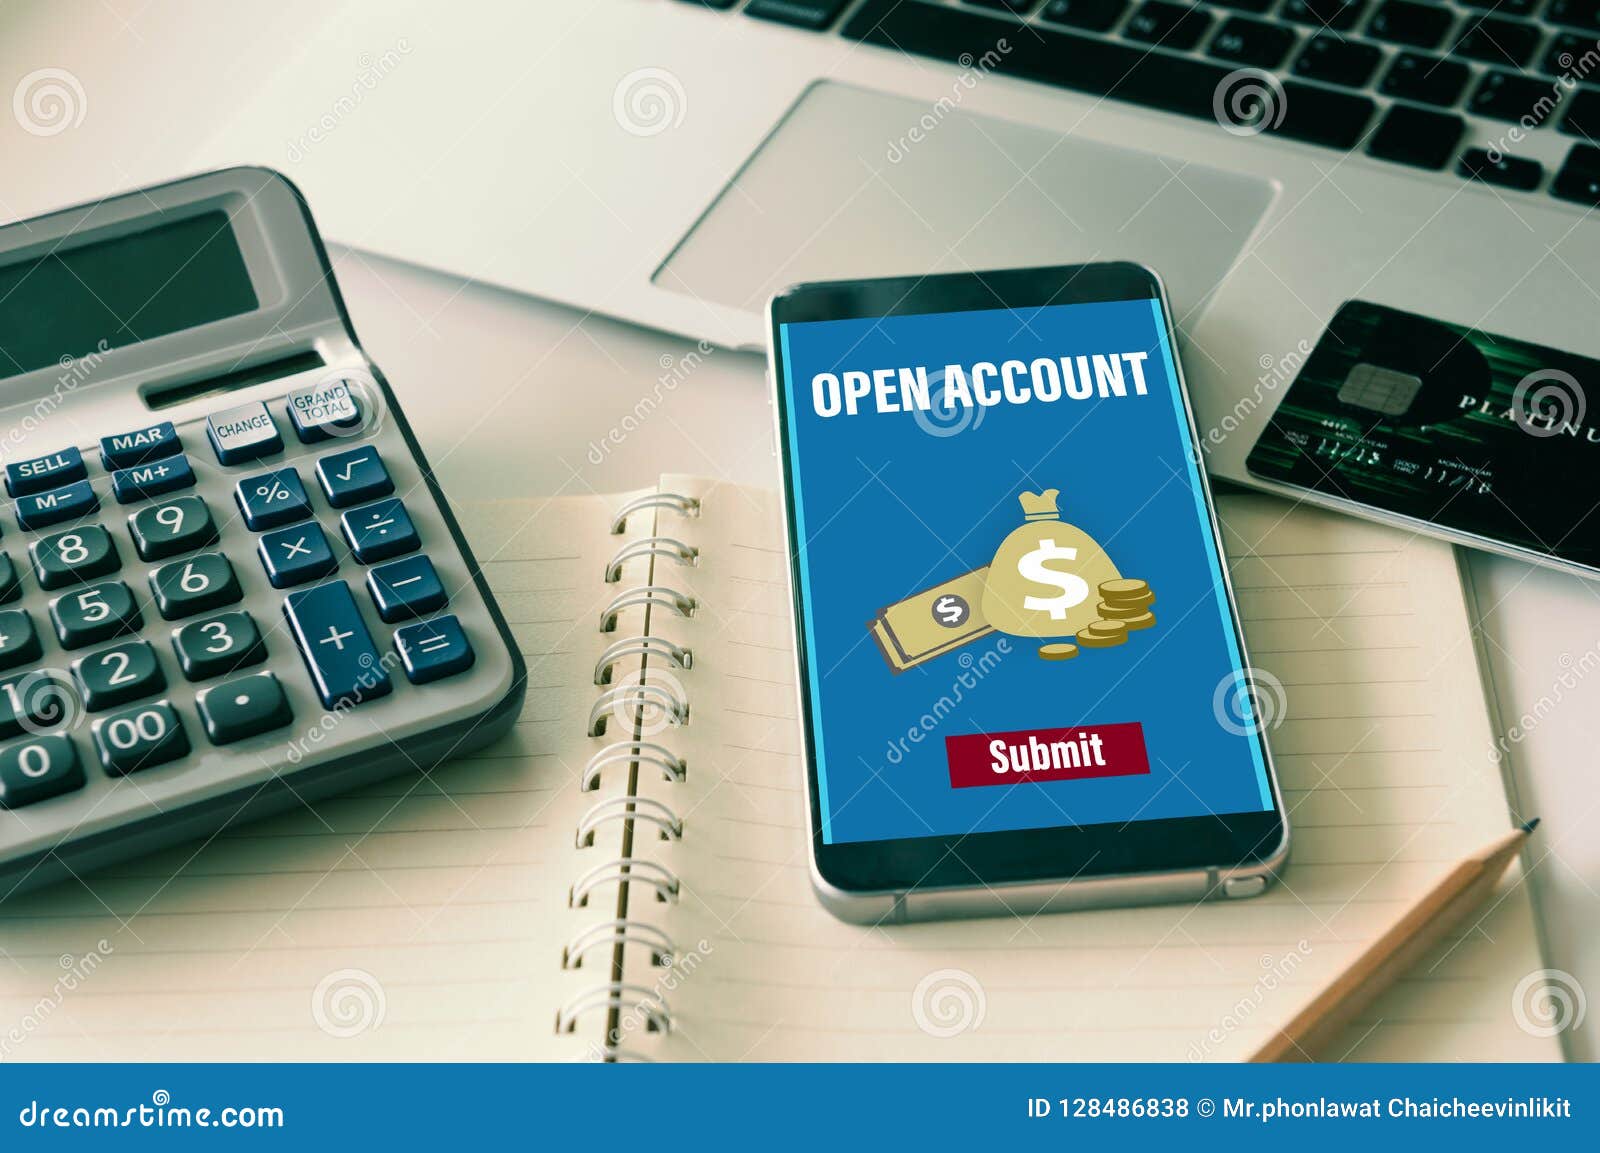 Open a bank account online stock photo. Image of account ...